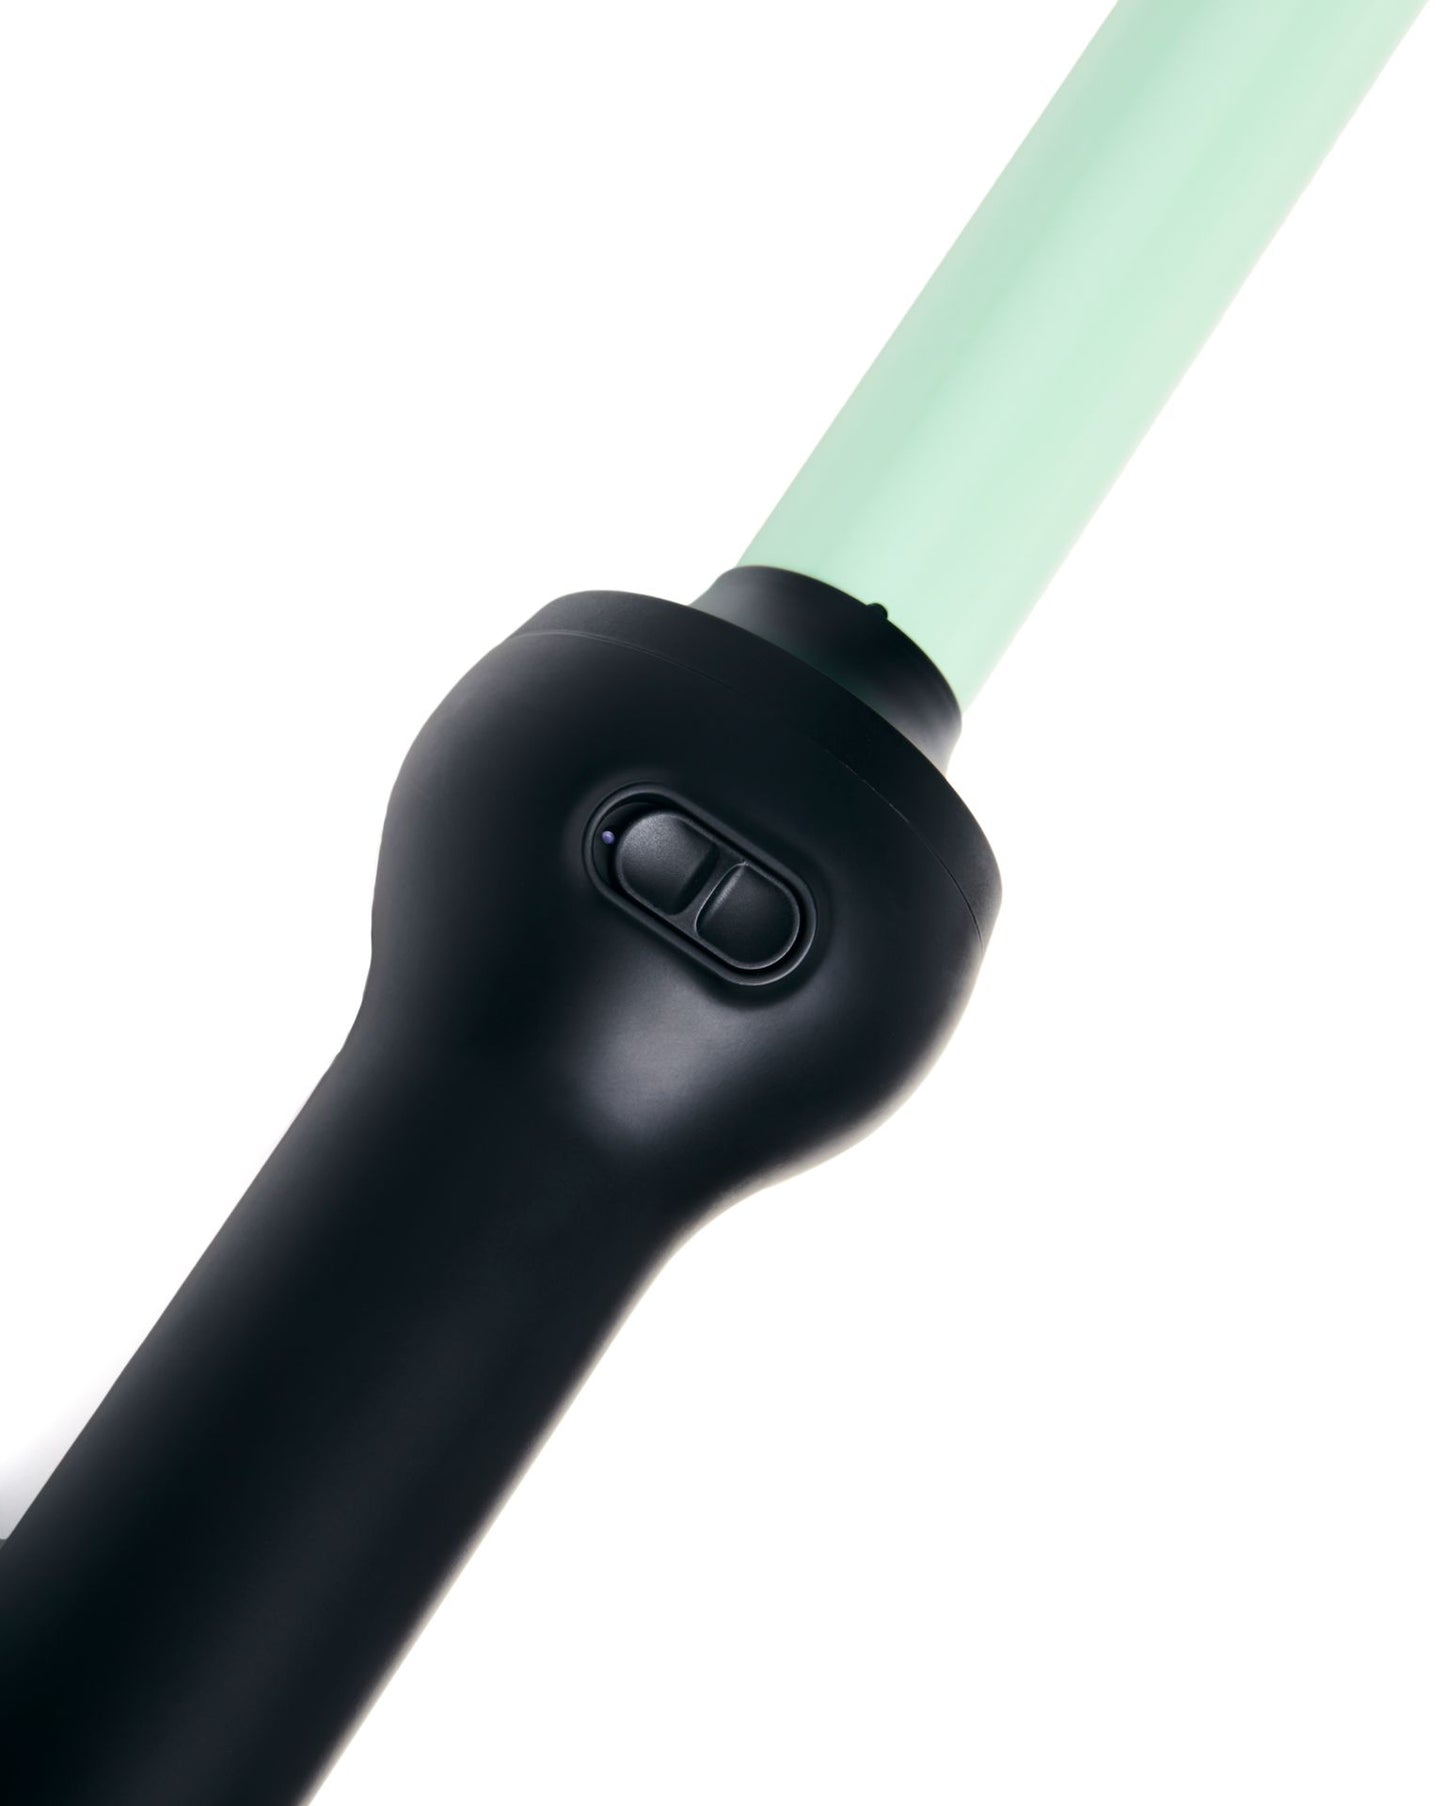 Cordless Ceramic Curling Wand 1 Inch